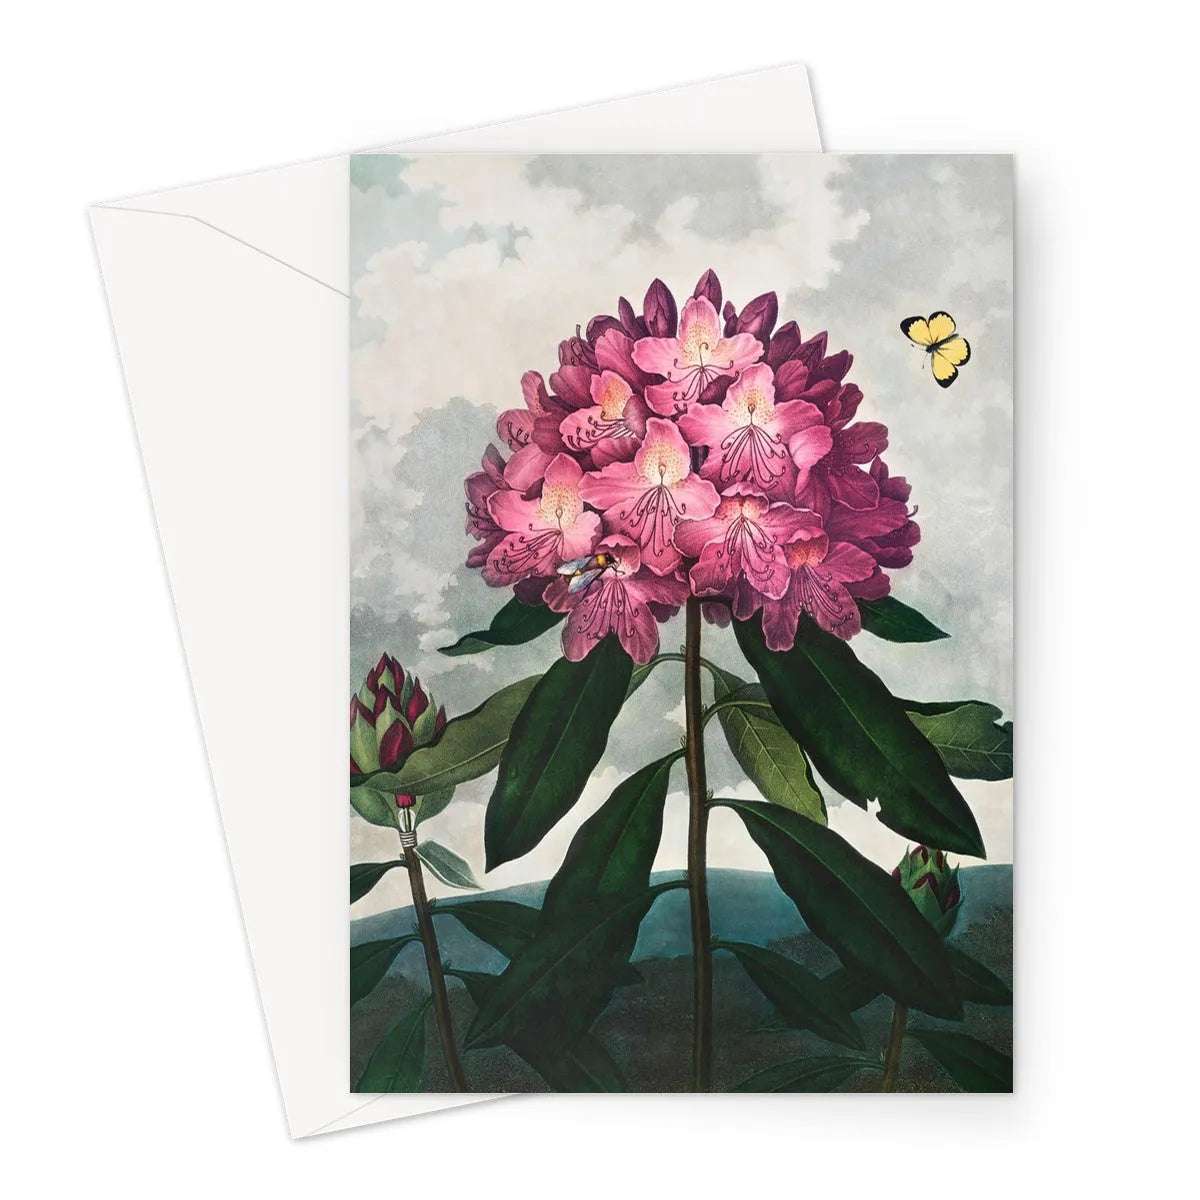 Pontic Rhododendron By Robert John Thornton Greeting Card - A5 Portrait / 1 Card - Notebooks & Notepads - Aesthetic Art